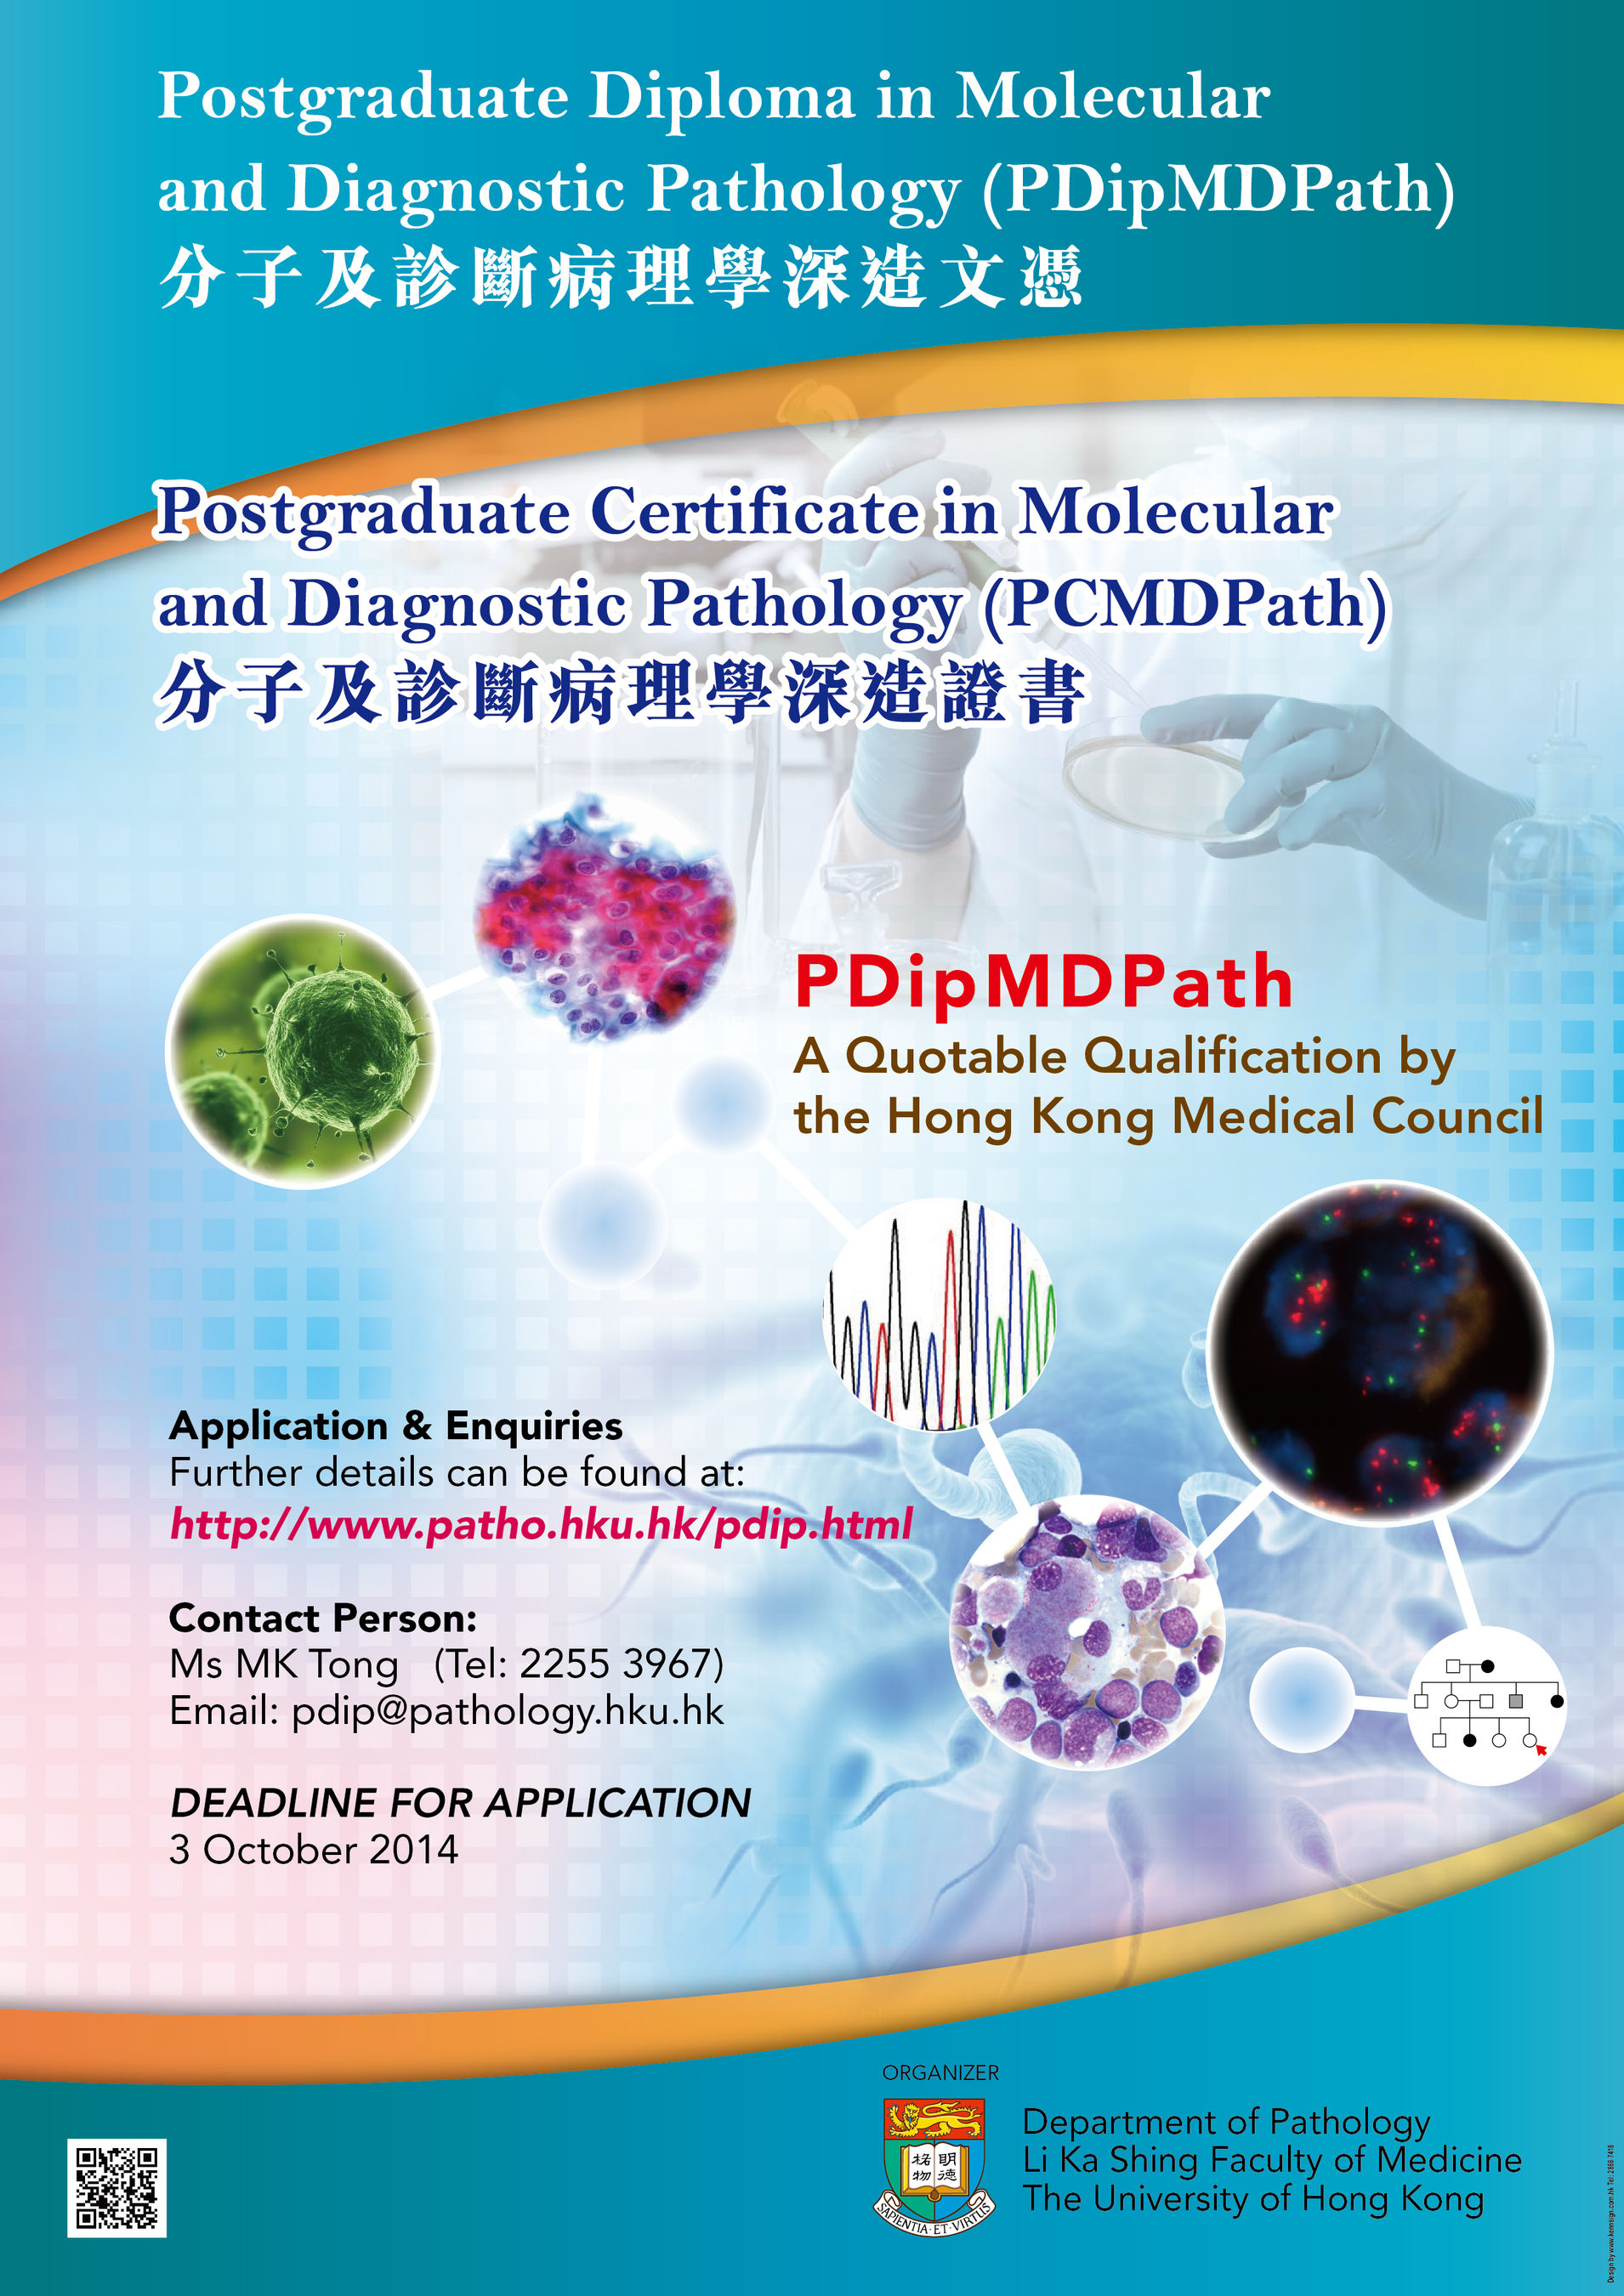 Postgraduate Diploma in Molecular and Diagnostic Pathology (Deadline for application: Oct 3, 2014) 